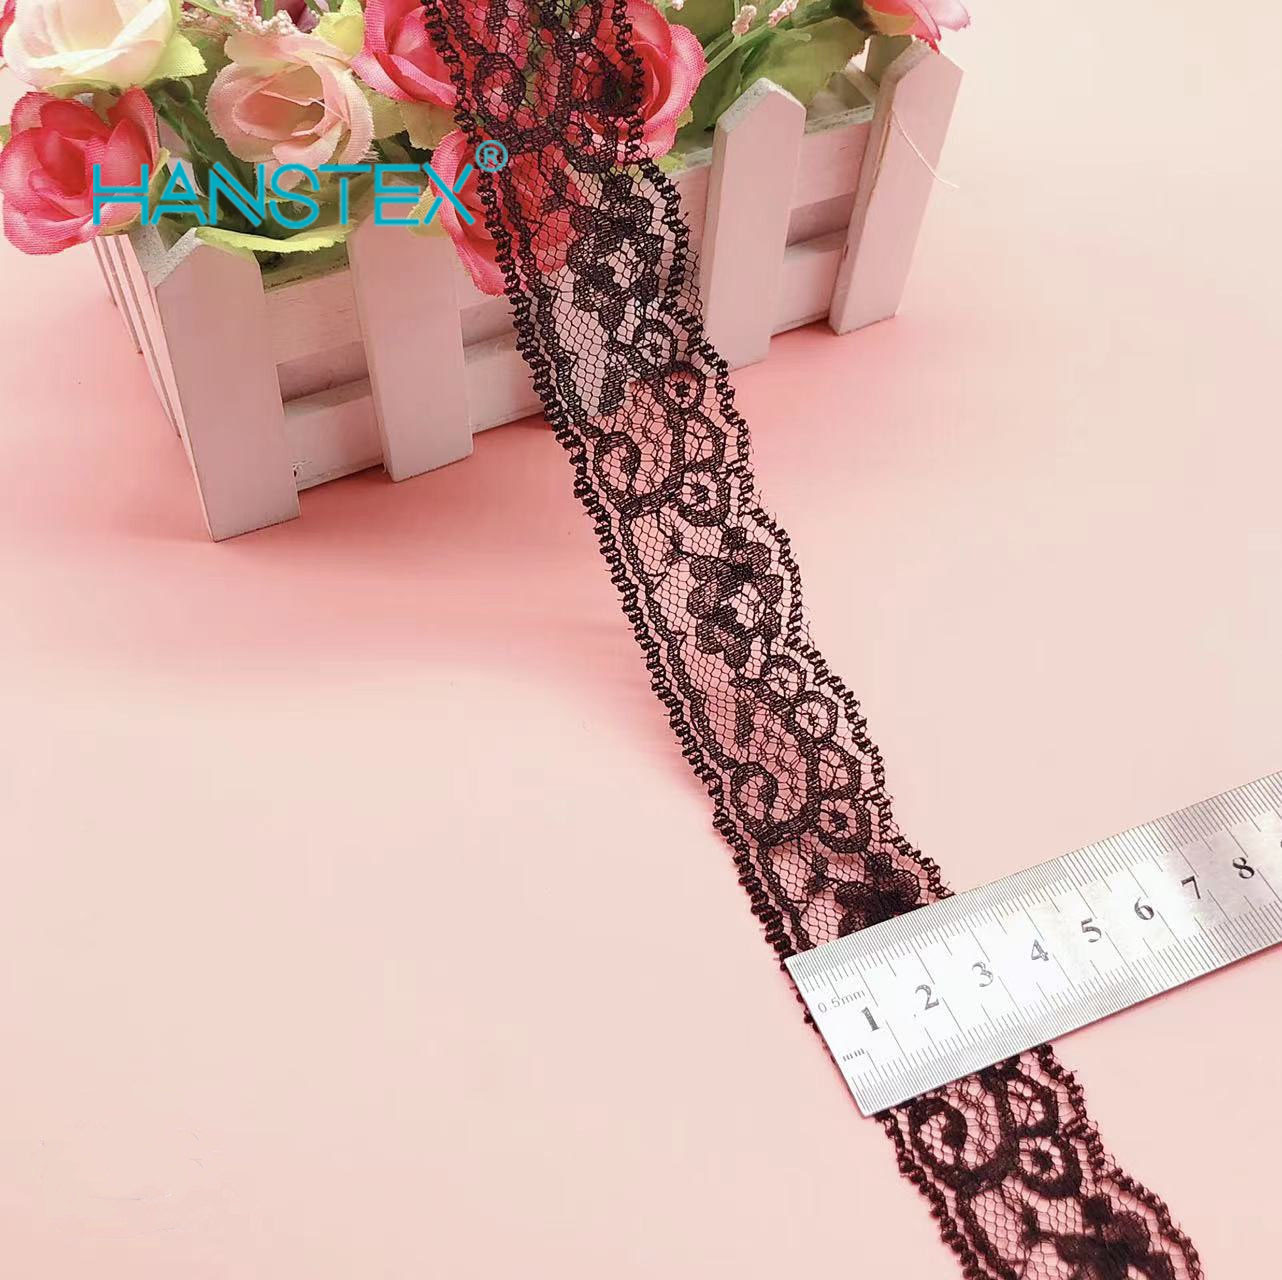 Polyester No Elastic Lace Trimming Lace Fabric Fringe